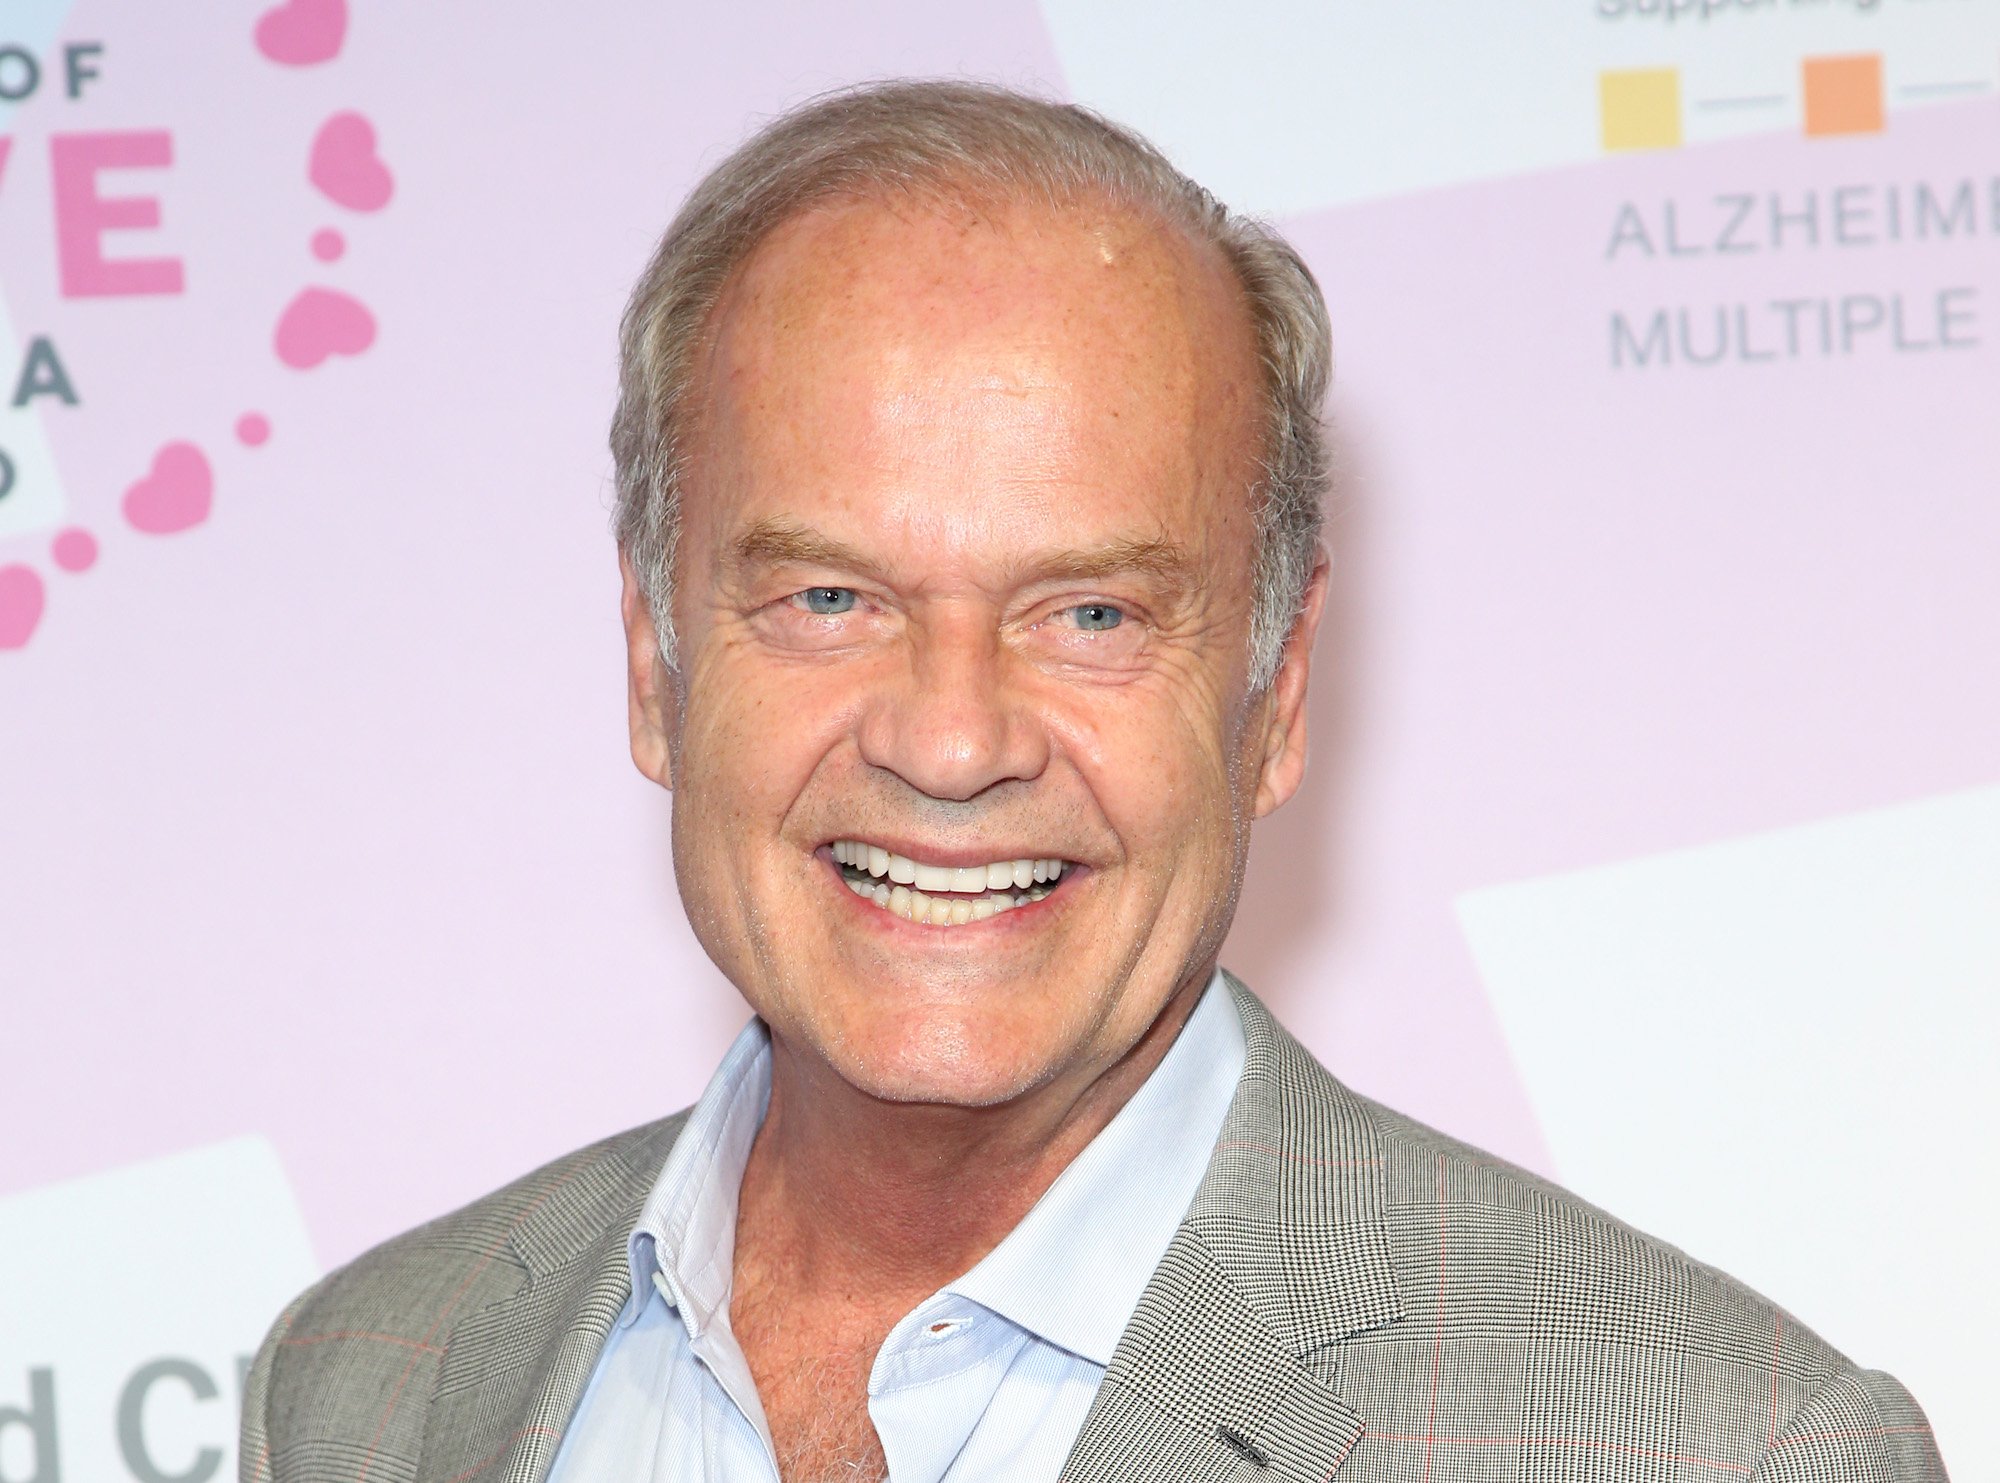 Kelsey Grammer smiling in front of a pink and white backdrop